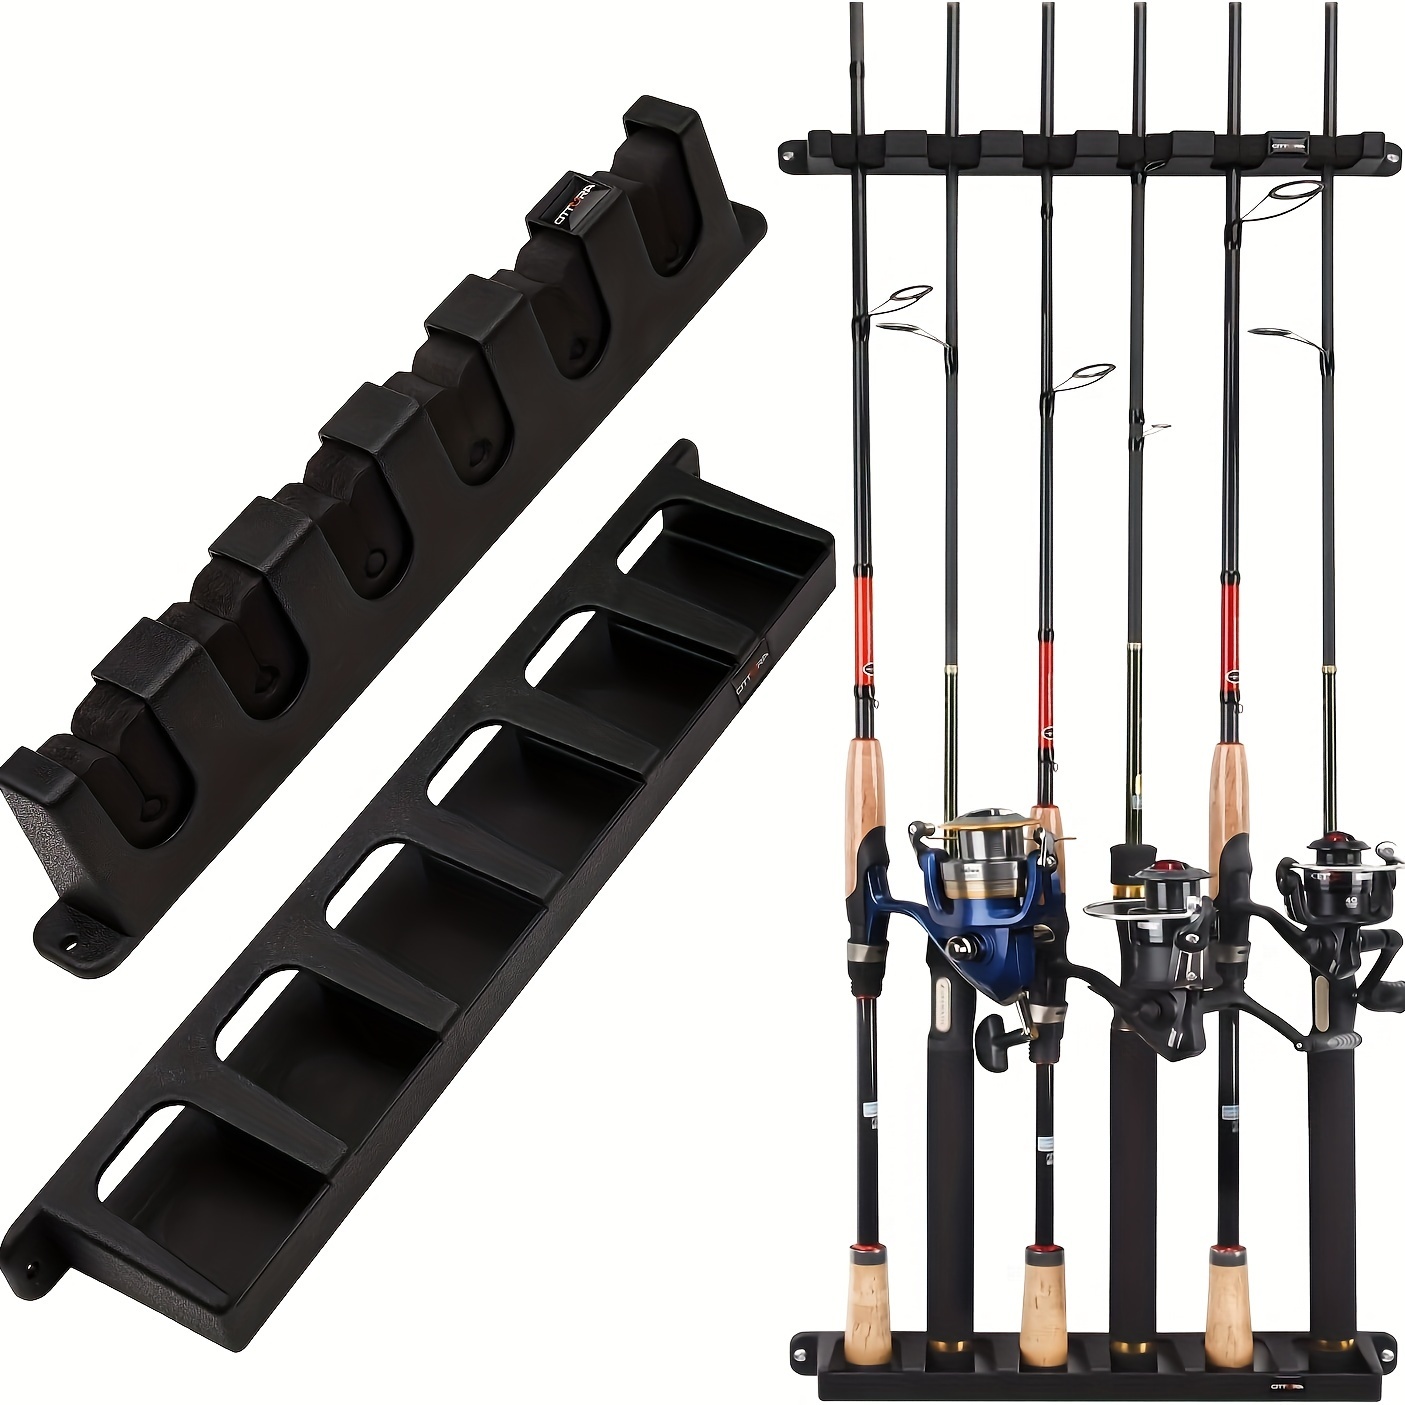 6-Hole Wall Mounted Fishing Rod Rack - Durable Plastic Holder for  Organizing and Displaying Your Fishing Poles